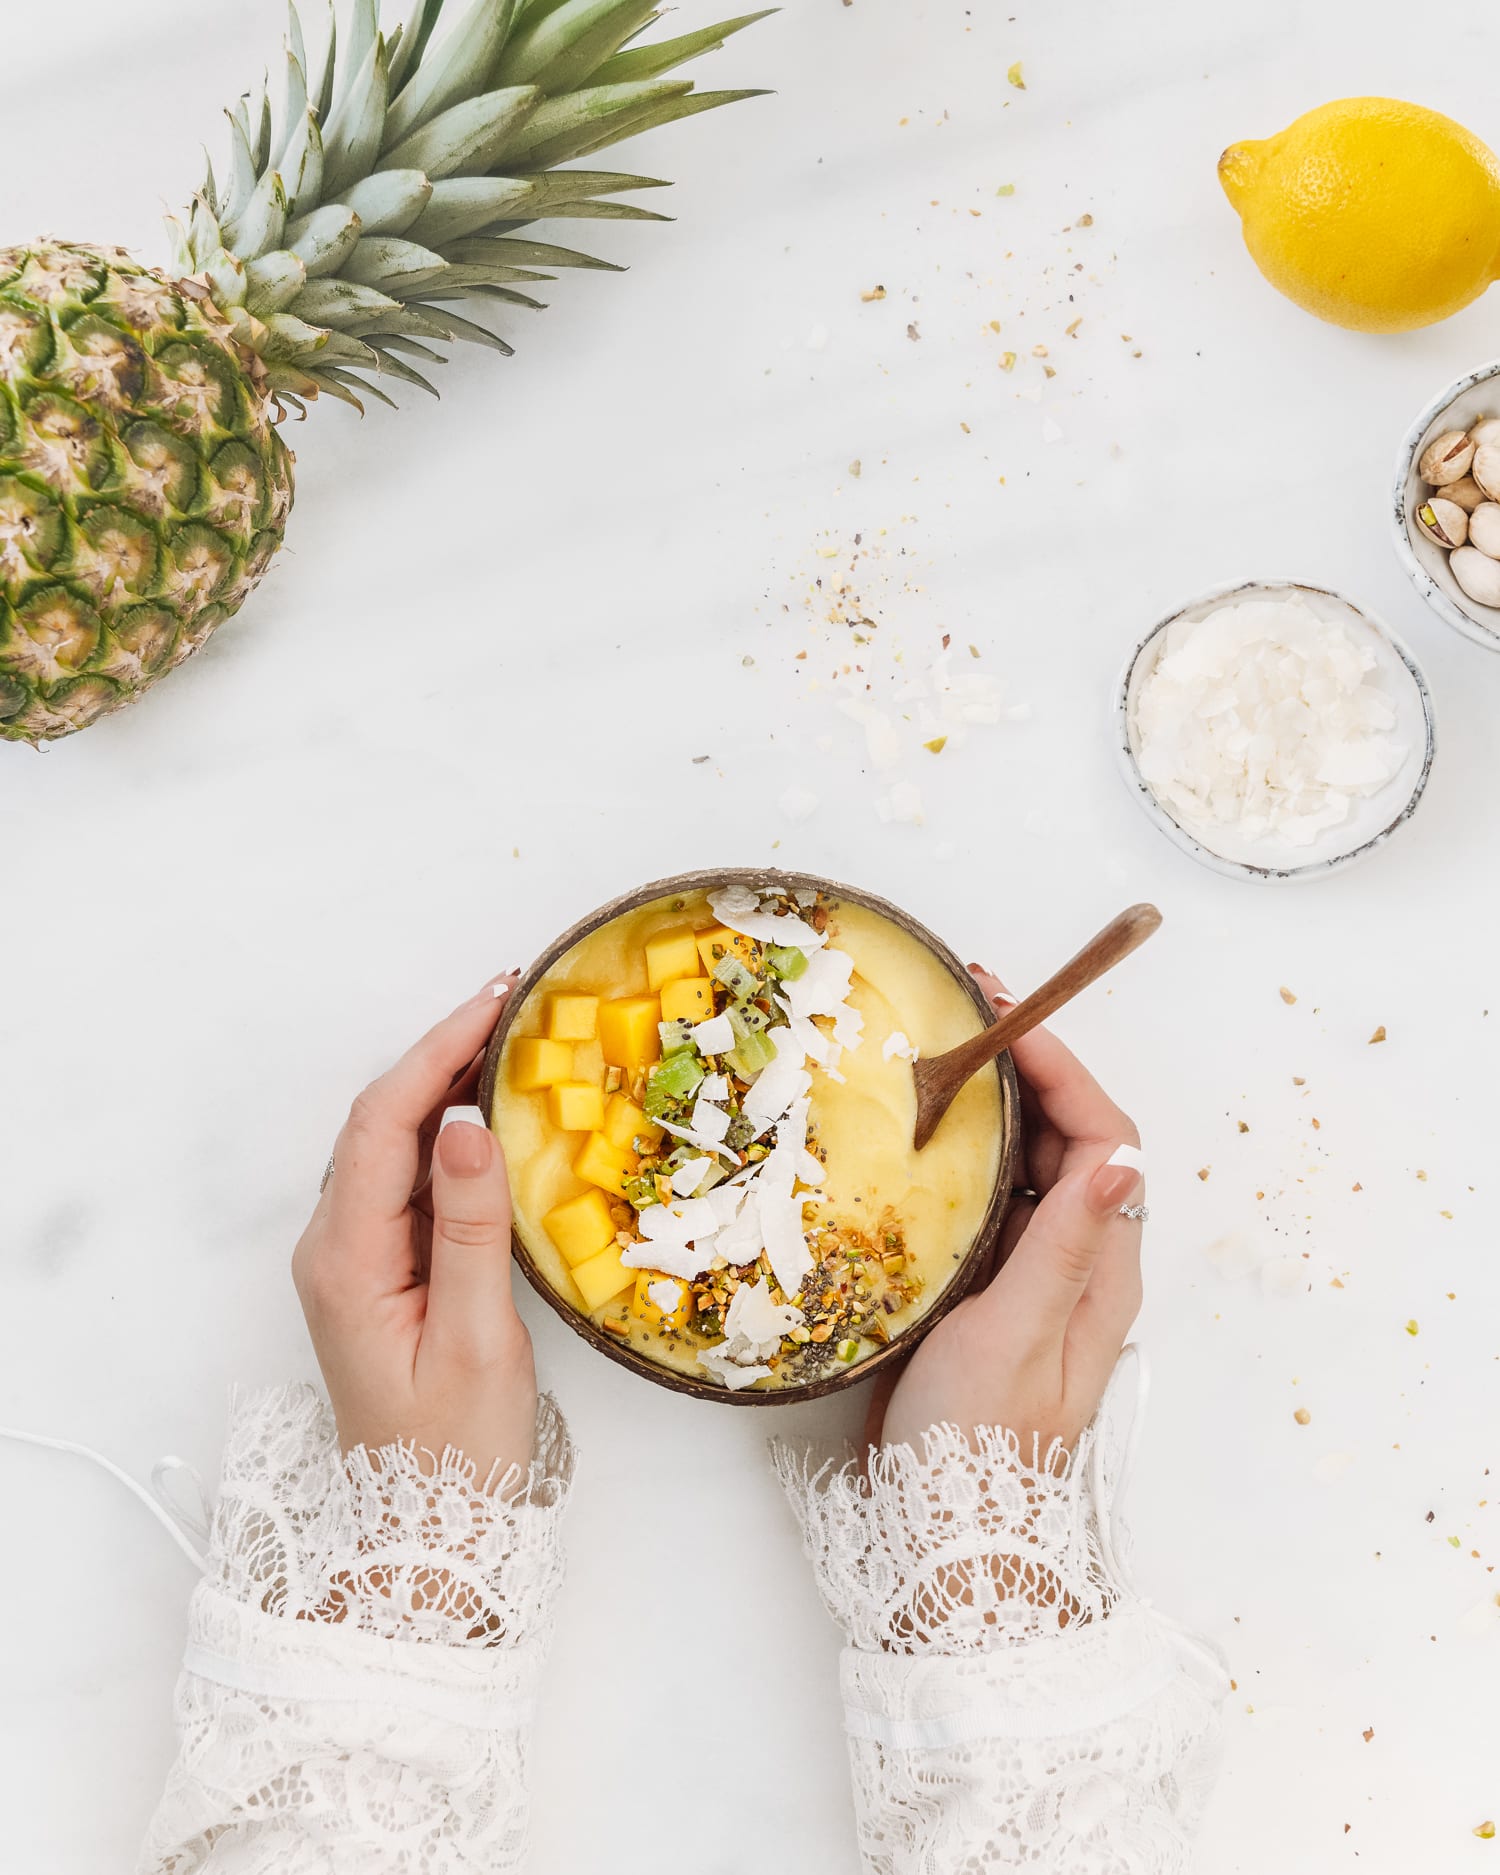 Recipe: Tropical Smoothie Bowl with Pineapple, Mango & Coconut Flakes